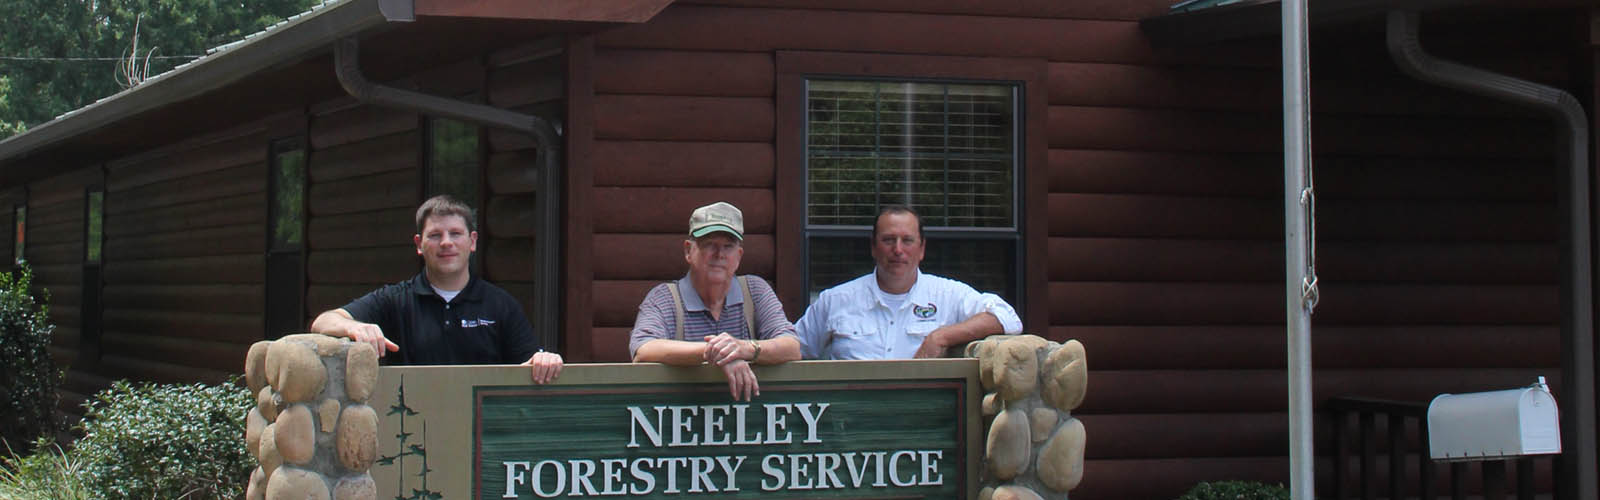 Neeley Forestry Service